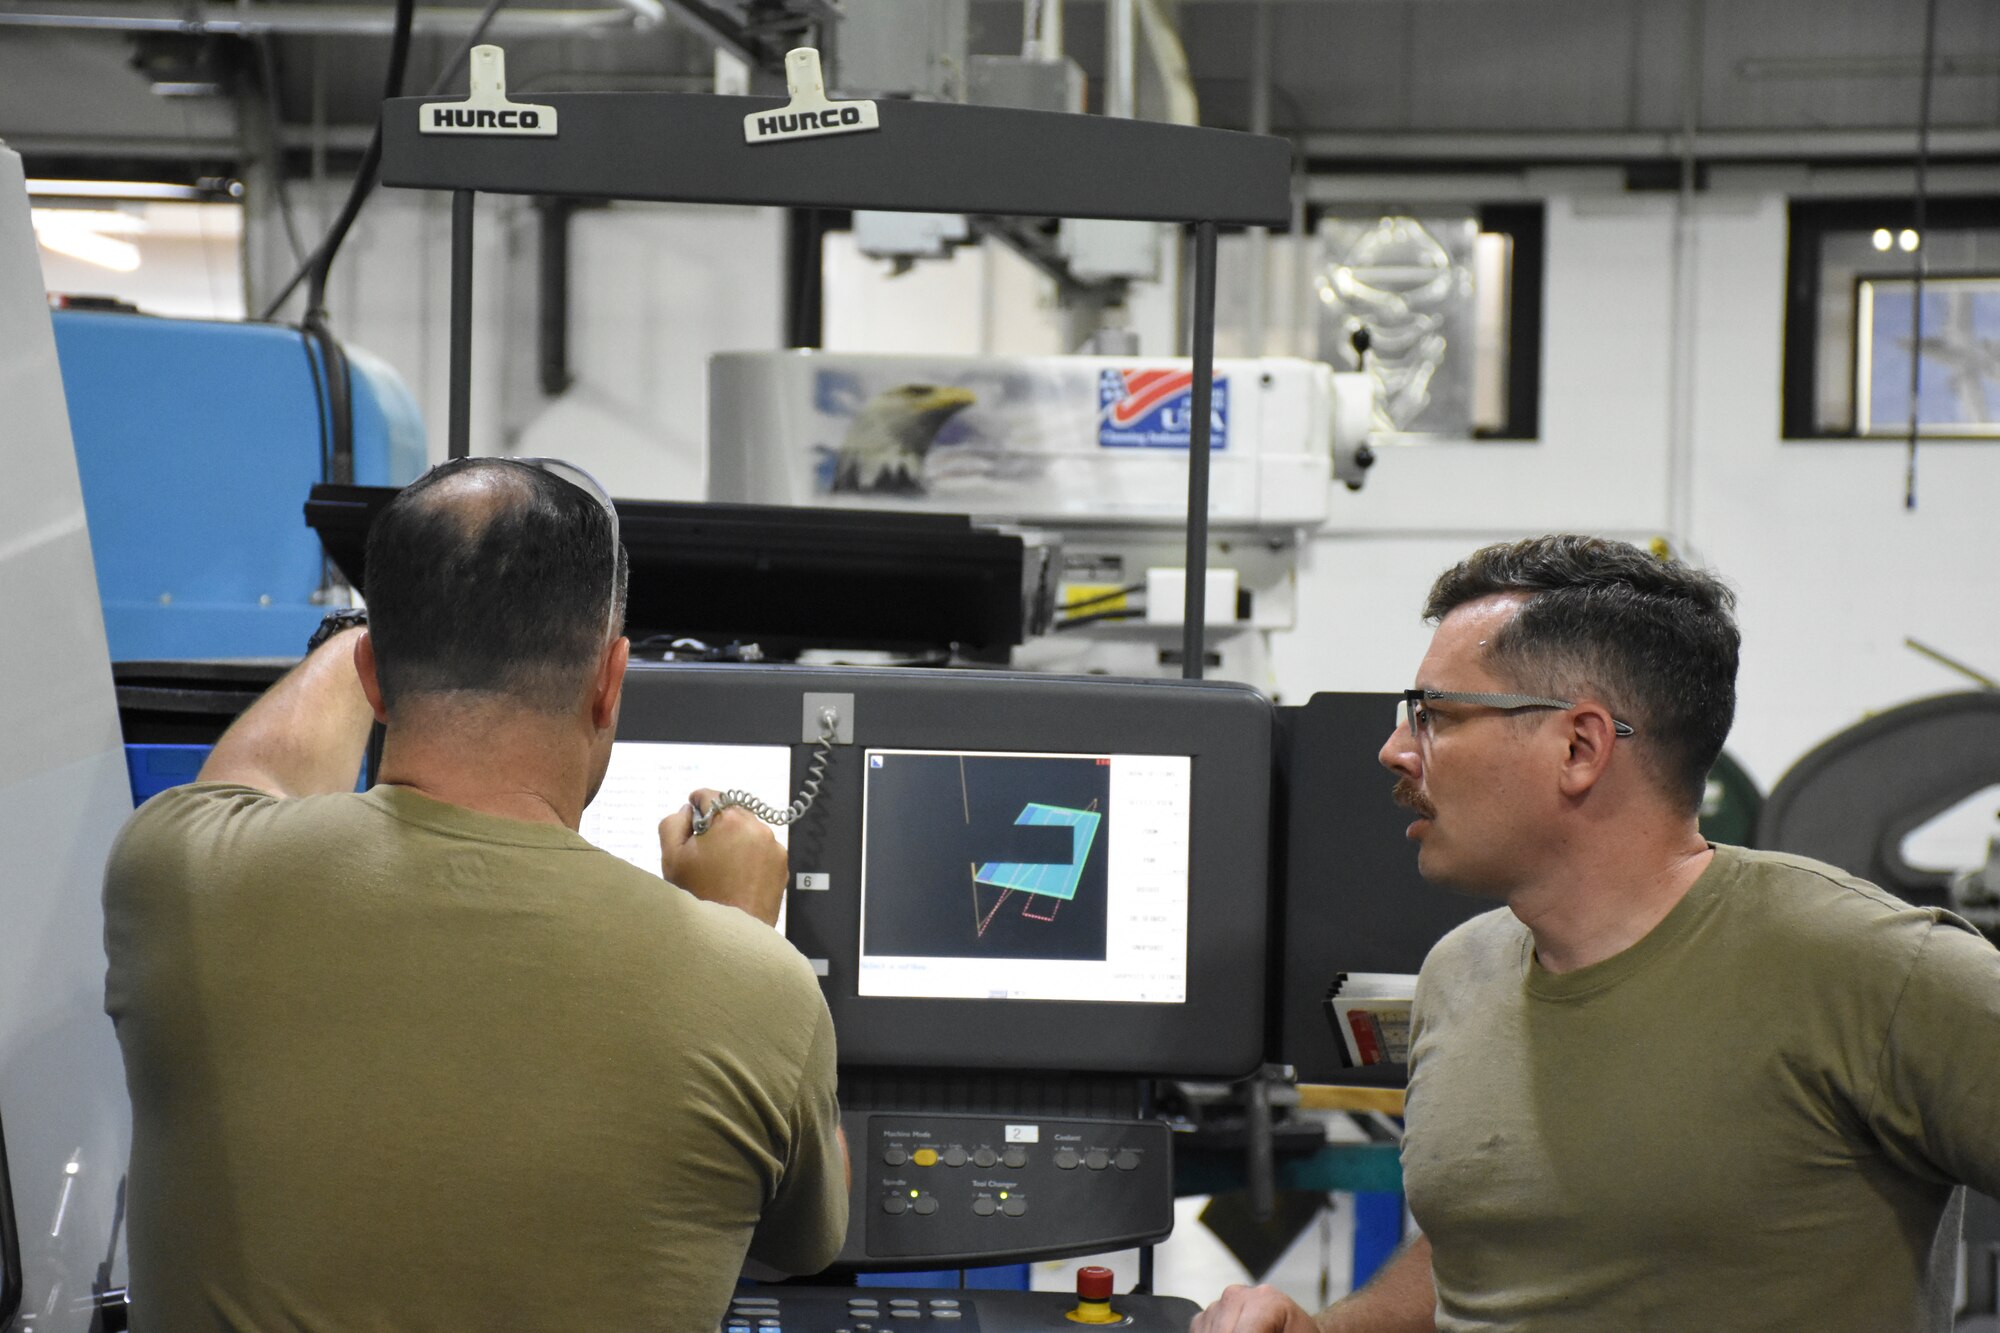 Master Sgt. Cameron Williams, left, and Staff Sgt. Johnathan Shellhart, both machinists with the 442d Maintenance Squadron, design a part on computer-aided drafting software.